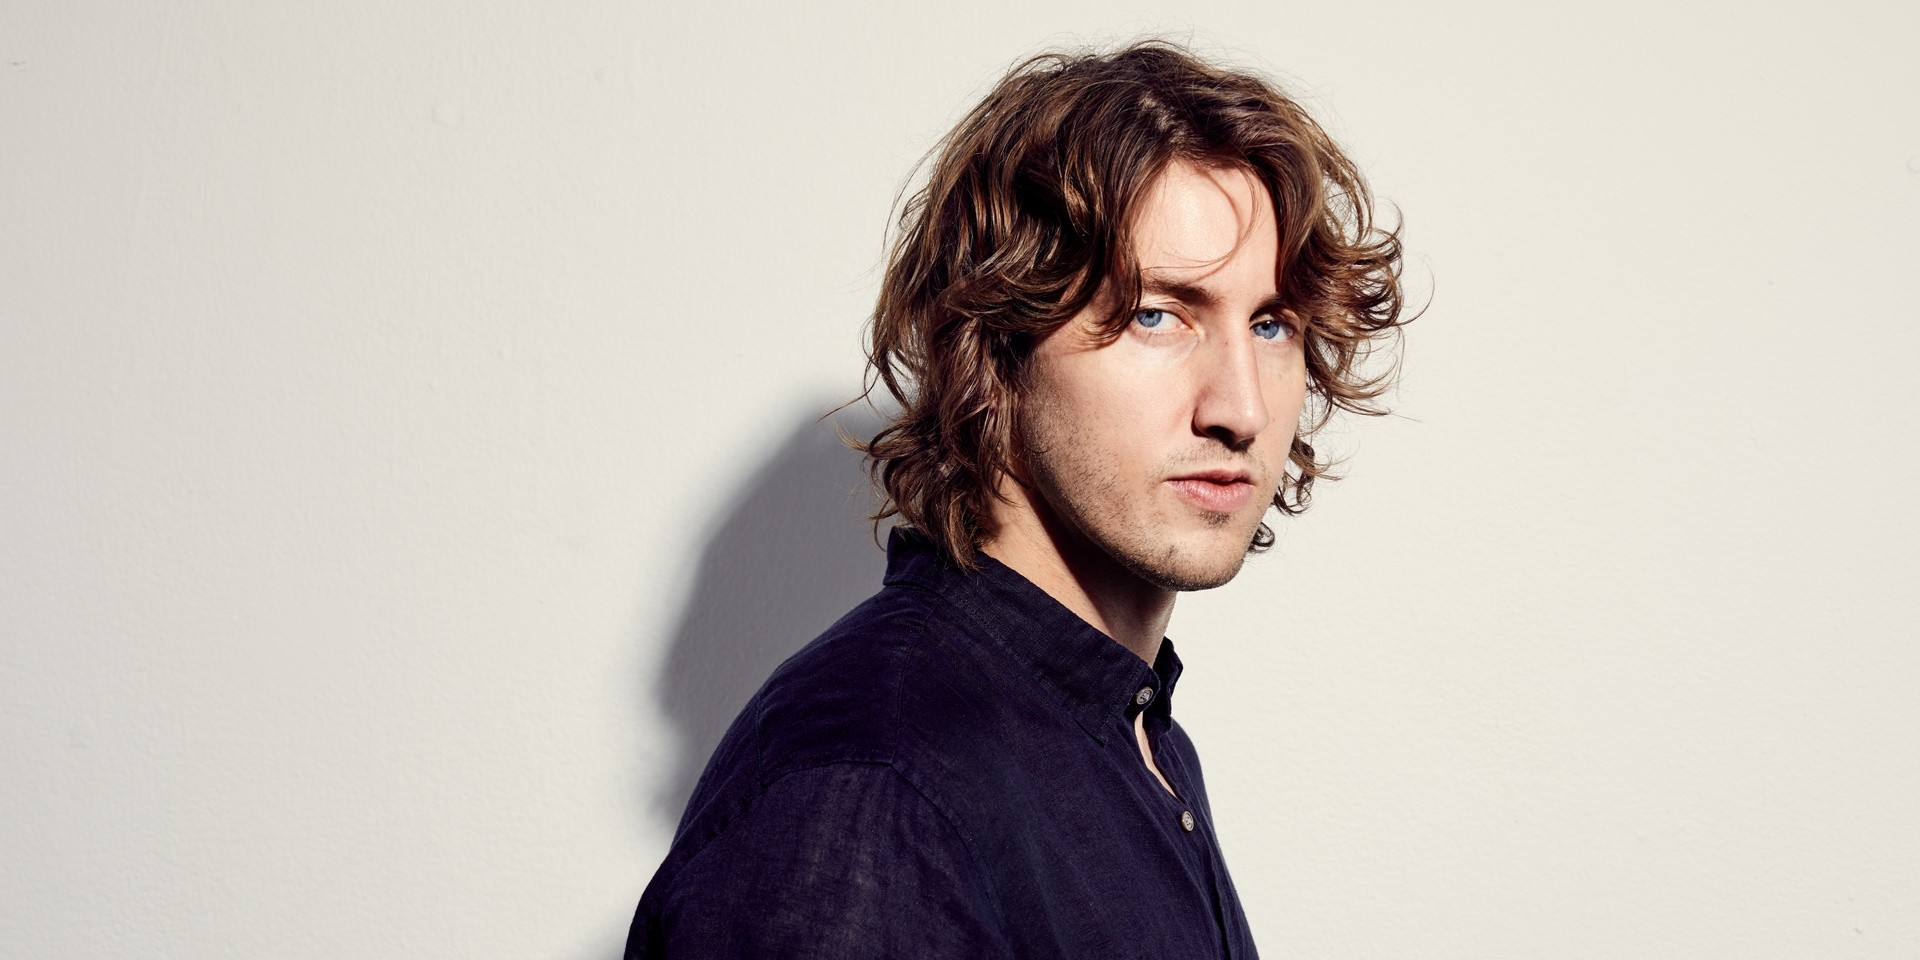 "It feels like I've slipped into this alternate universe": An interview with Dean Lewis